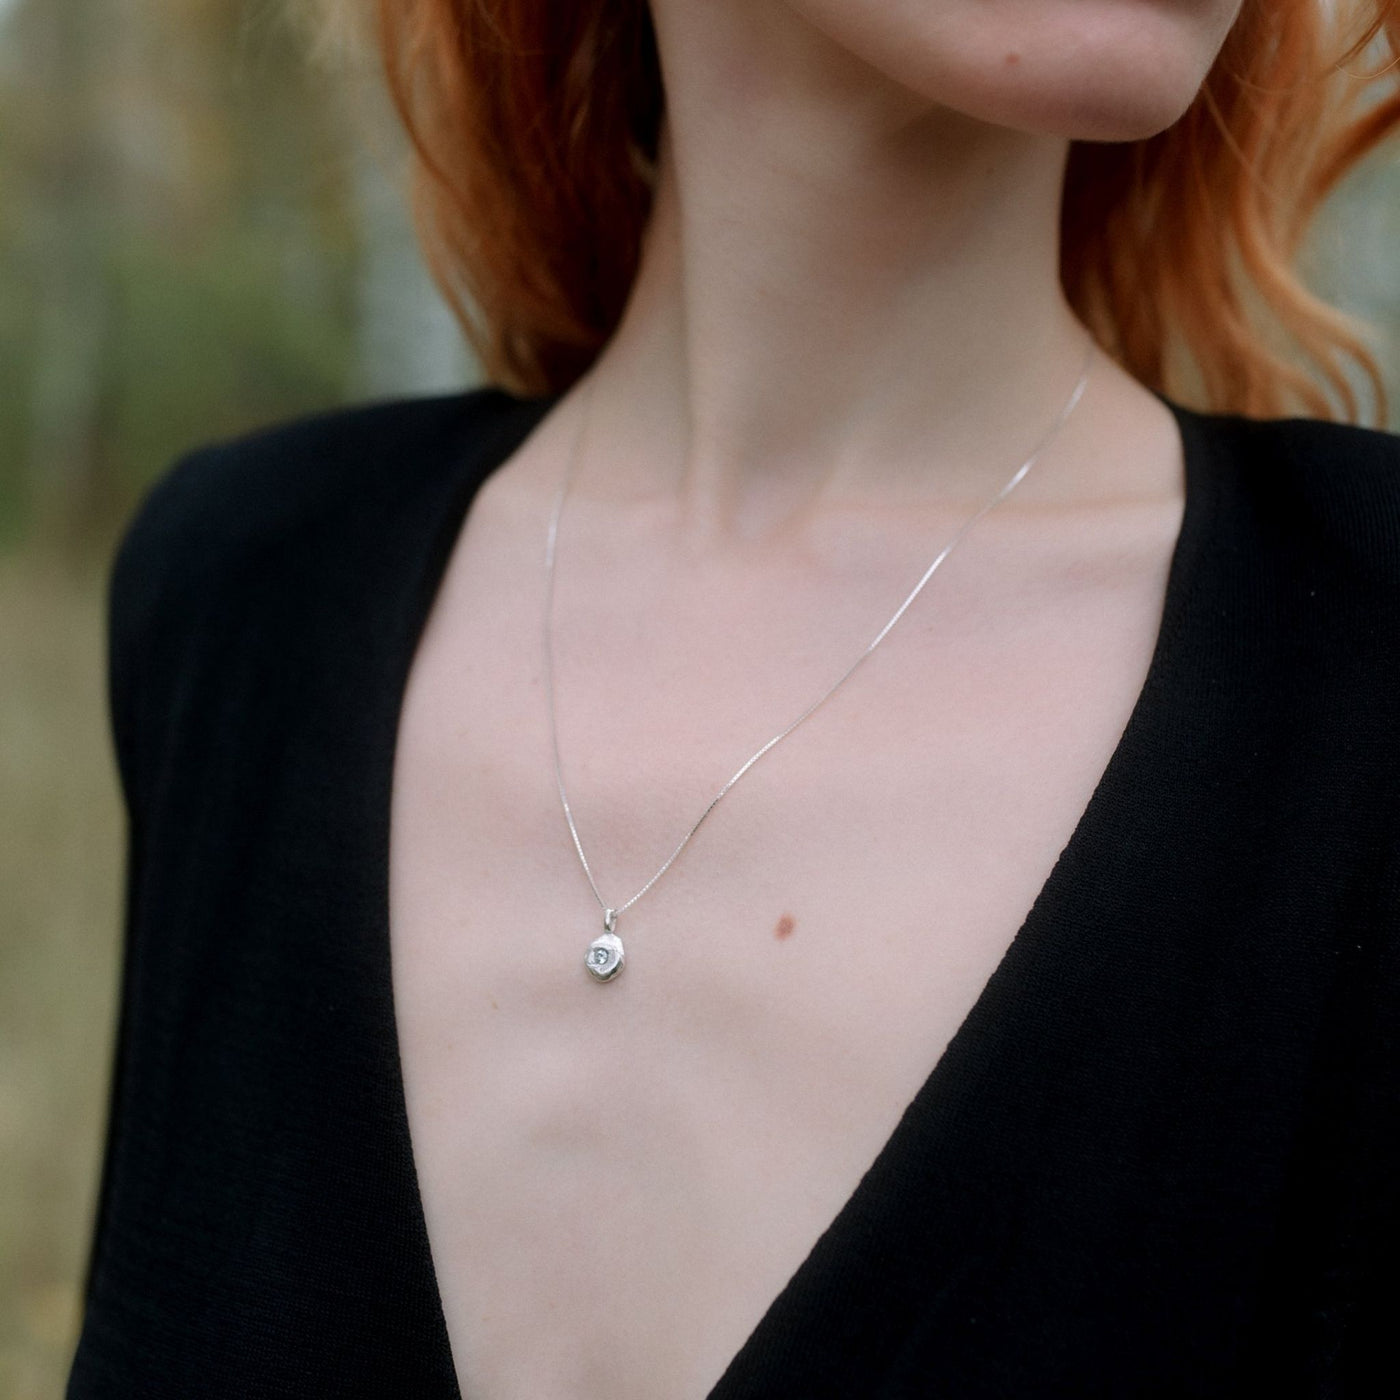 LÆRDAL // Necklace with a delicate pendant made of fine silver with a zirconia stone 